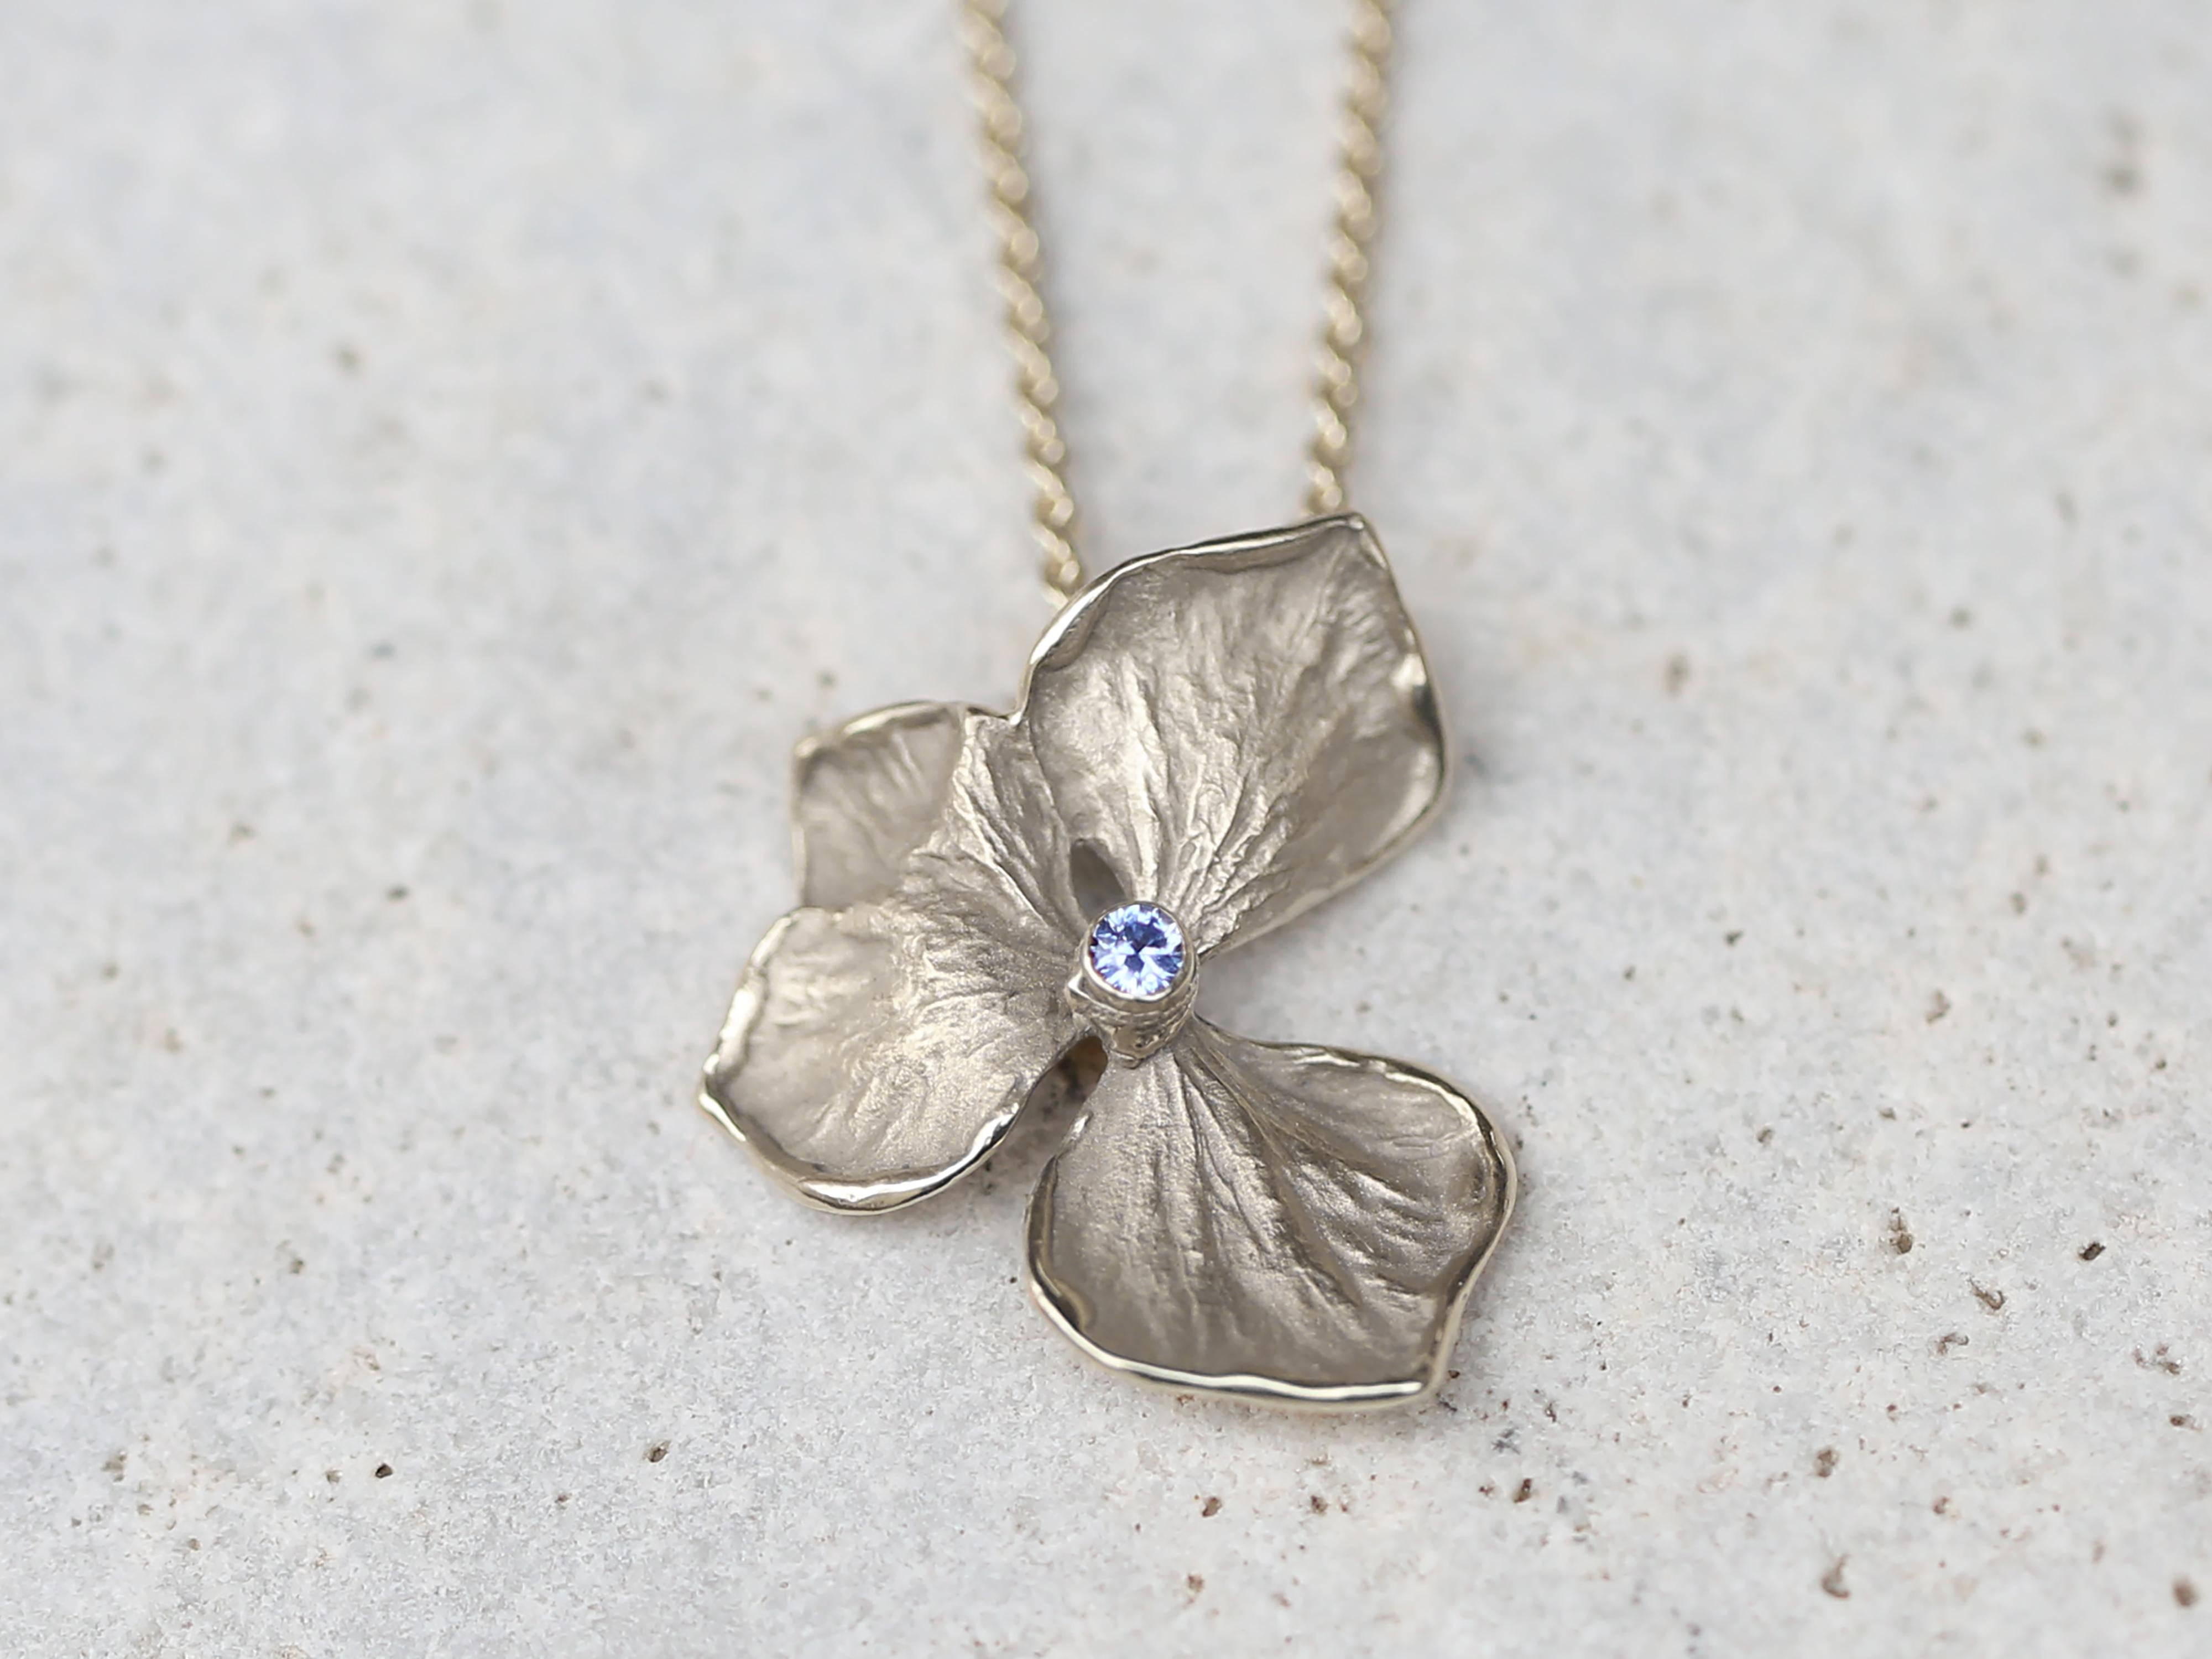 Large Solid White Gold Hydrangea Flower Necklace

This unique pendant is made having a hydrangea flower as a source of inspiration. Each pendant is crafted in wax and then cast in gold.

Materials: Flower Pendant: Solid 14k Gold
Size approx: flower: